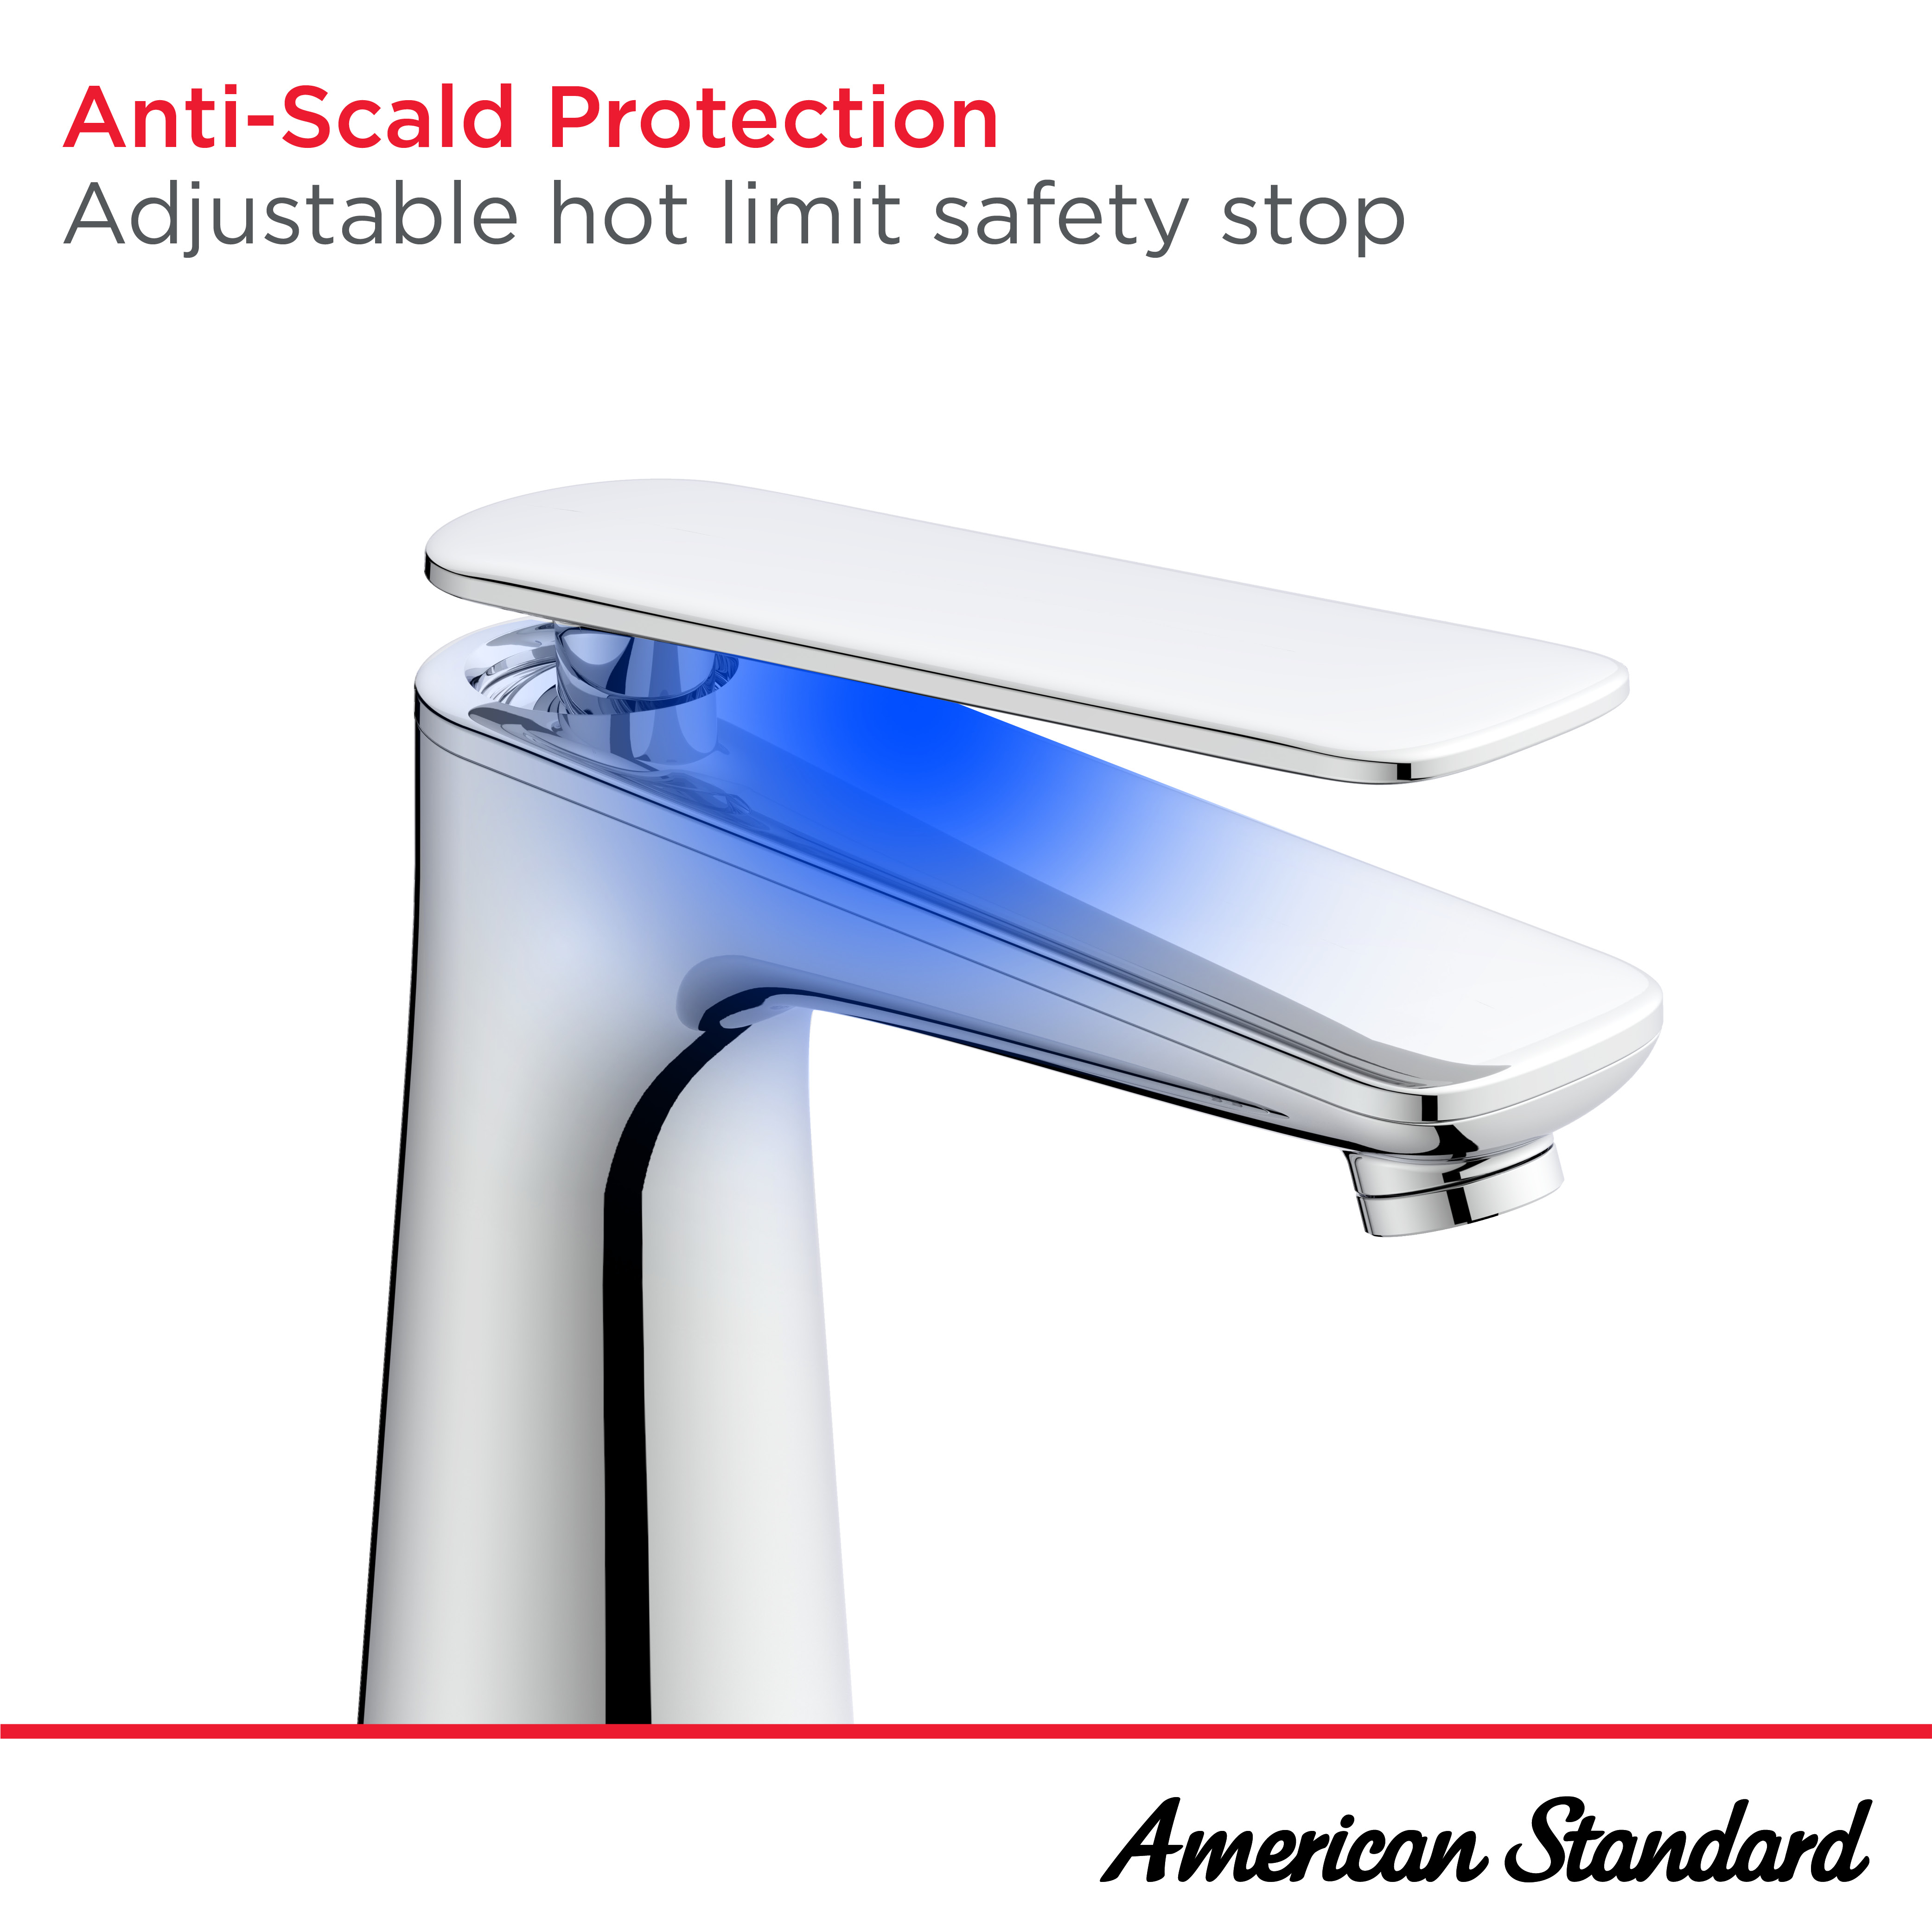 Aspirations® Single-Handle Bathroom Faucet 1.2 gpm/ 4.5 L/min With Lever Handle